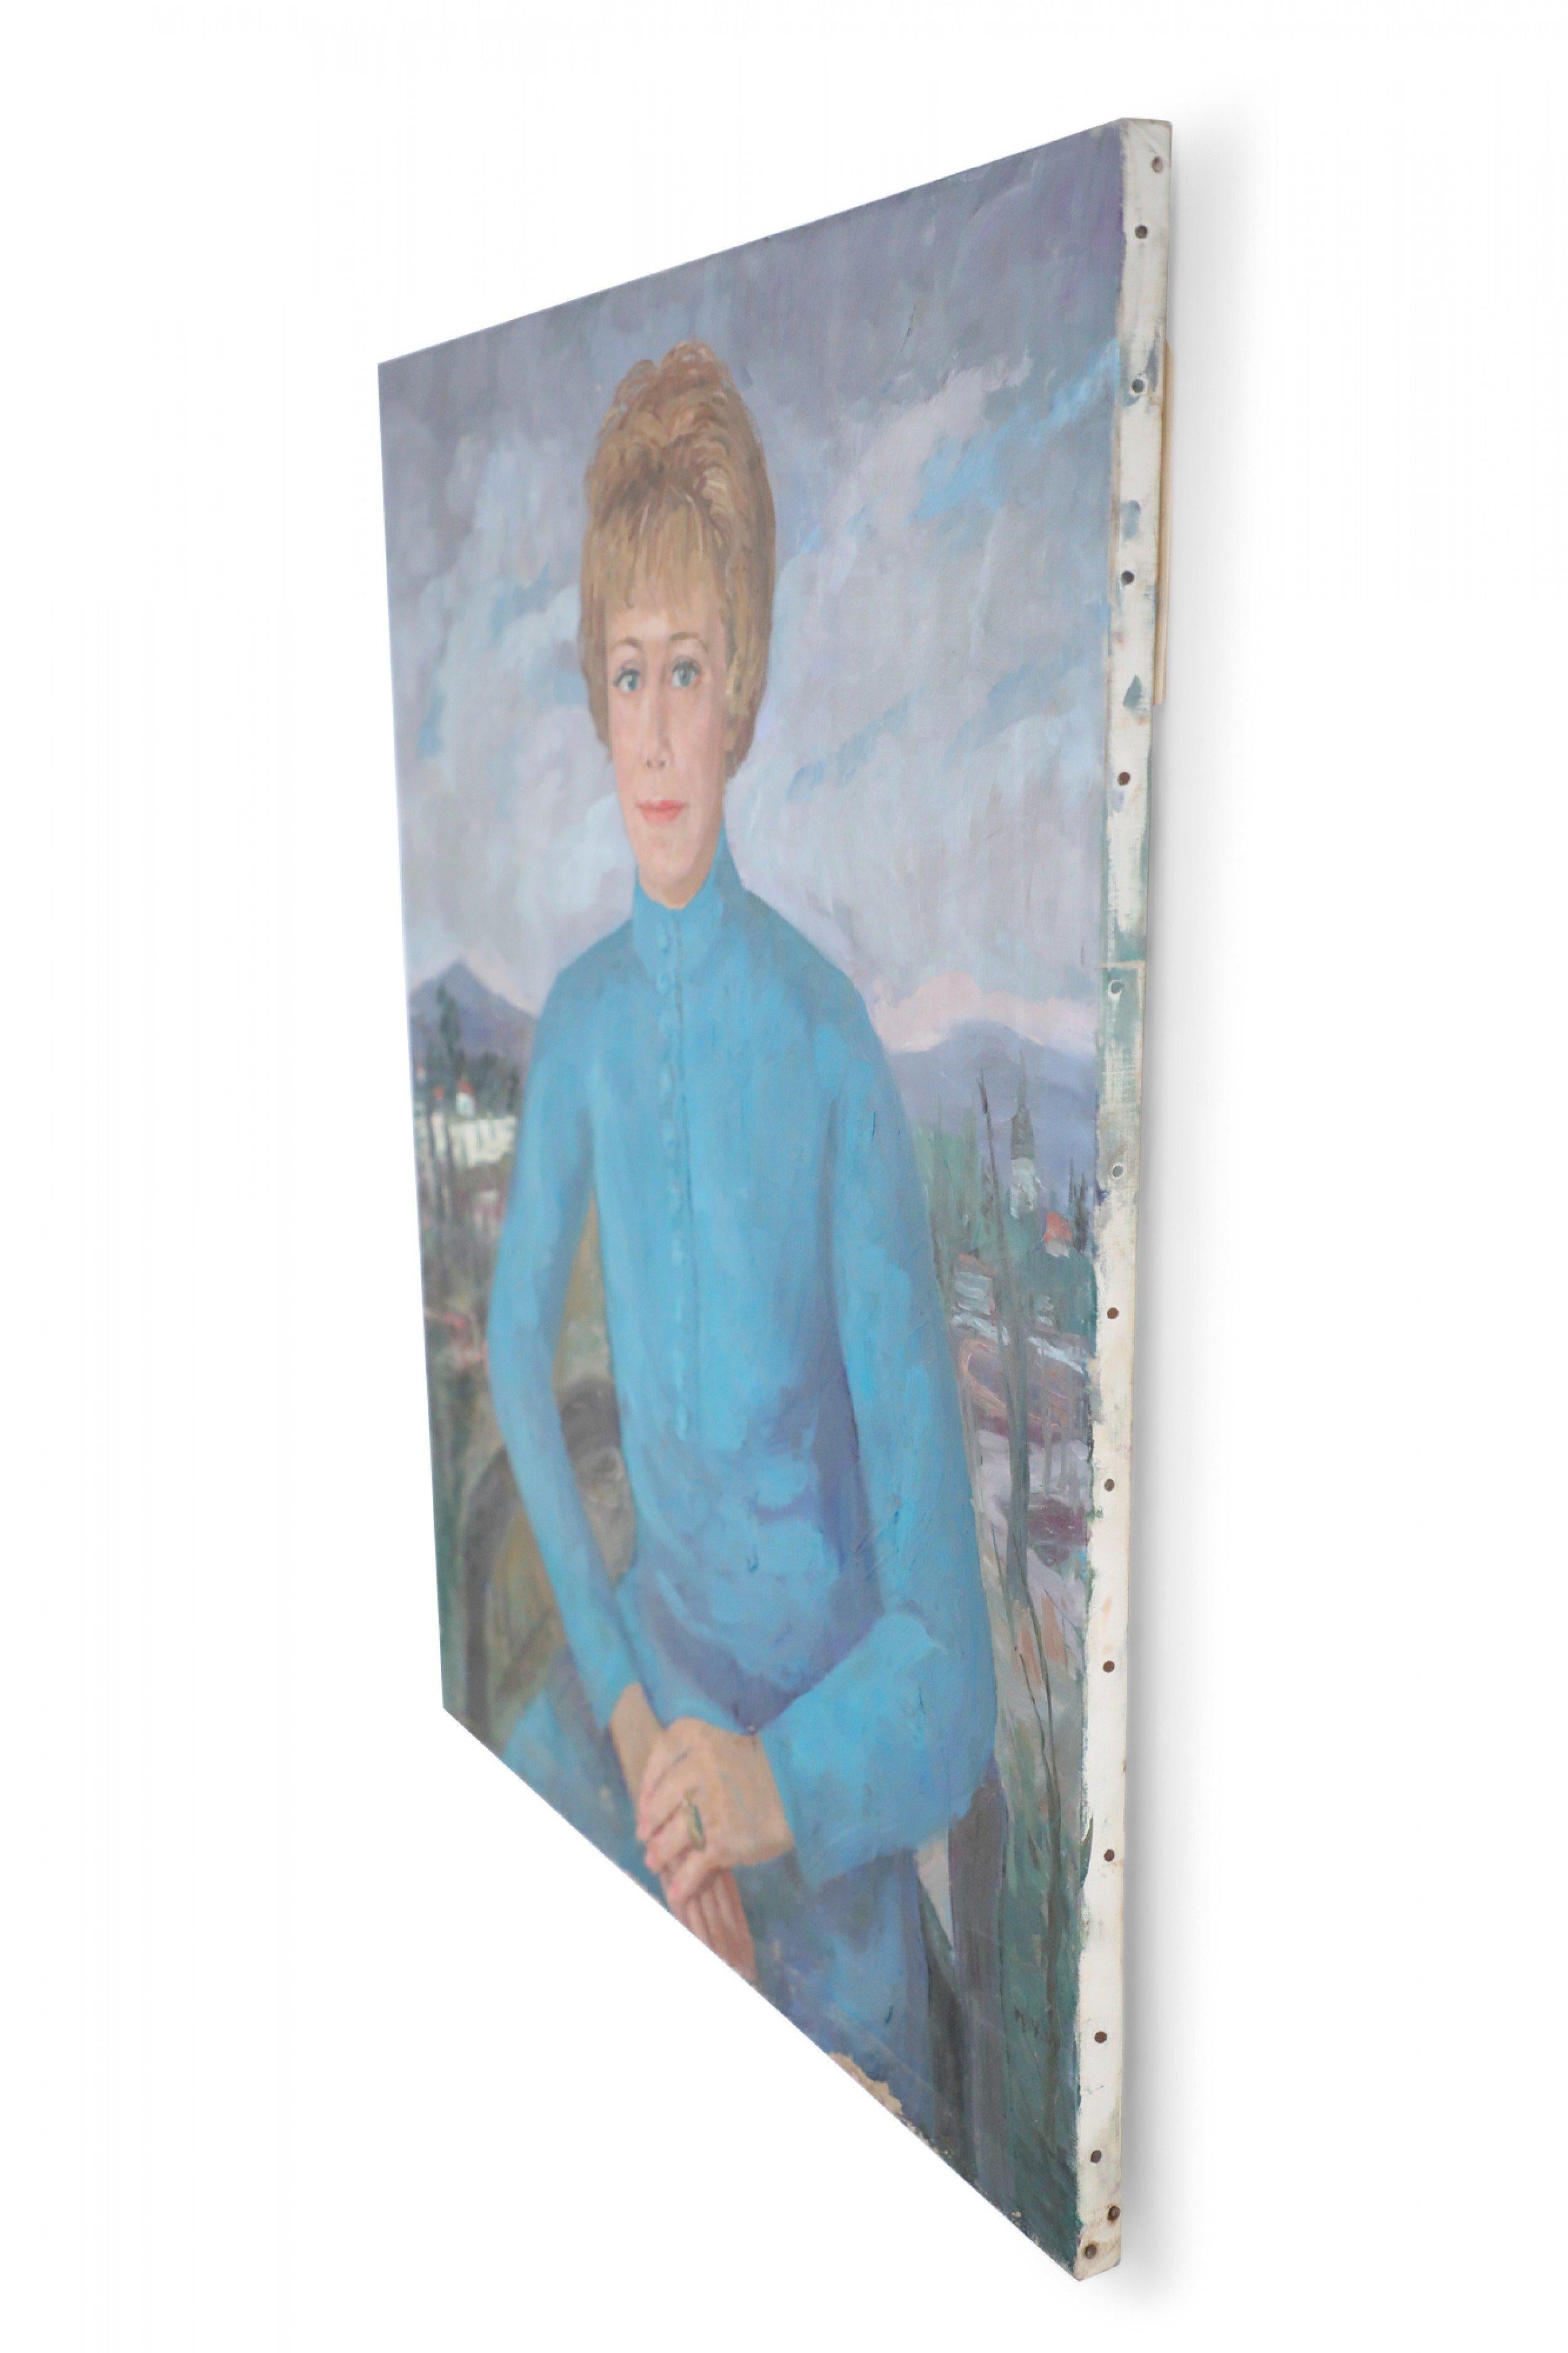 Oiled Portrait of a Woman in a Blue Dress Painting on Canvas For Sale